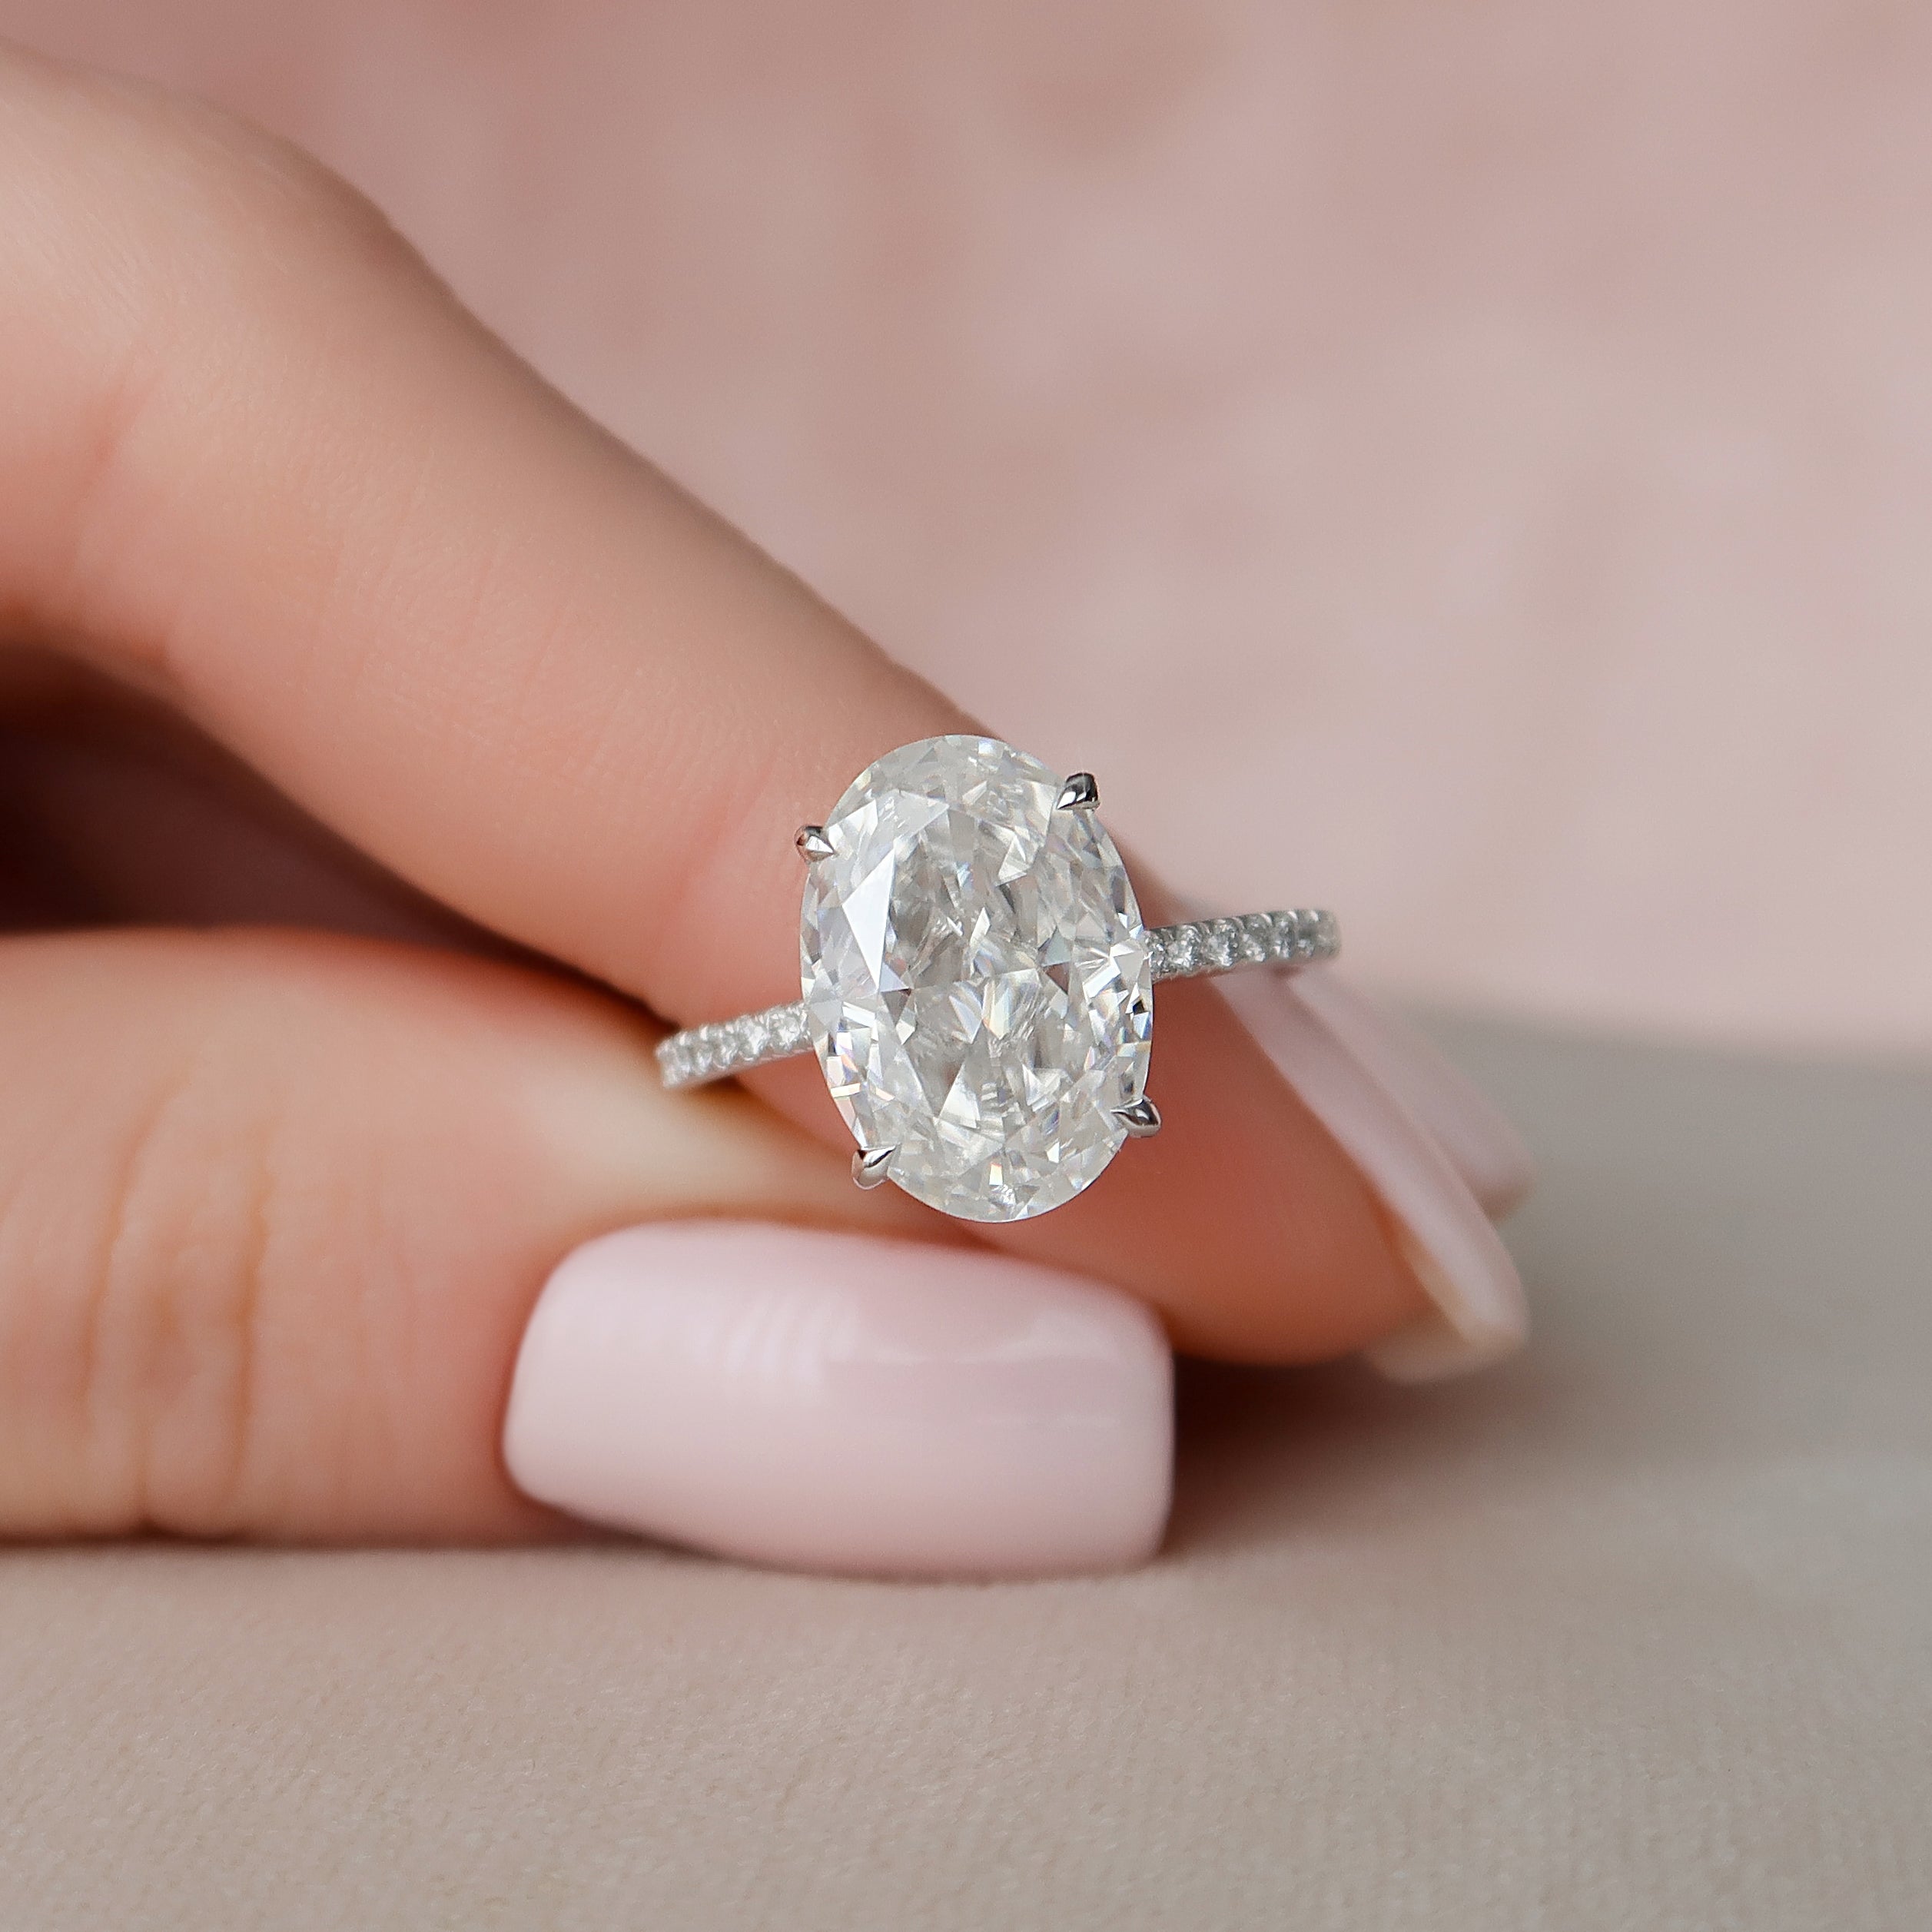 Moissanite Is So Tacky - And We Absolutely Love It